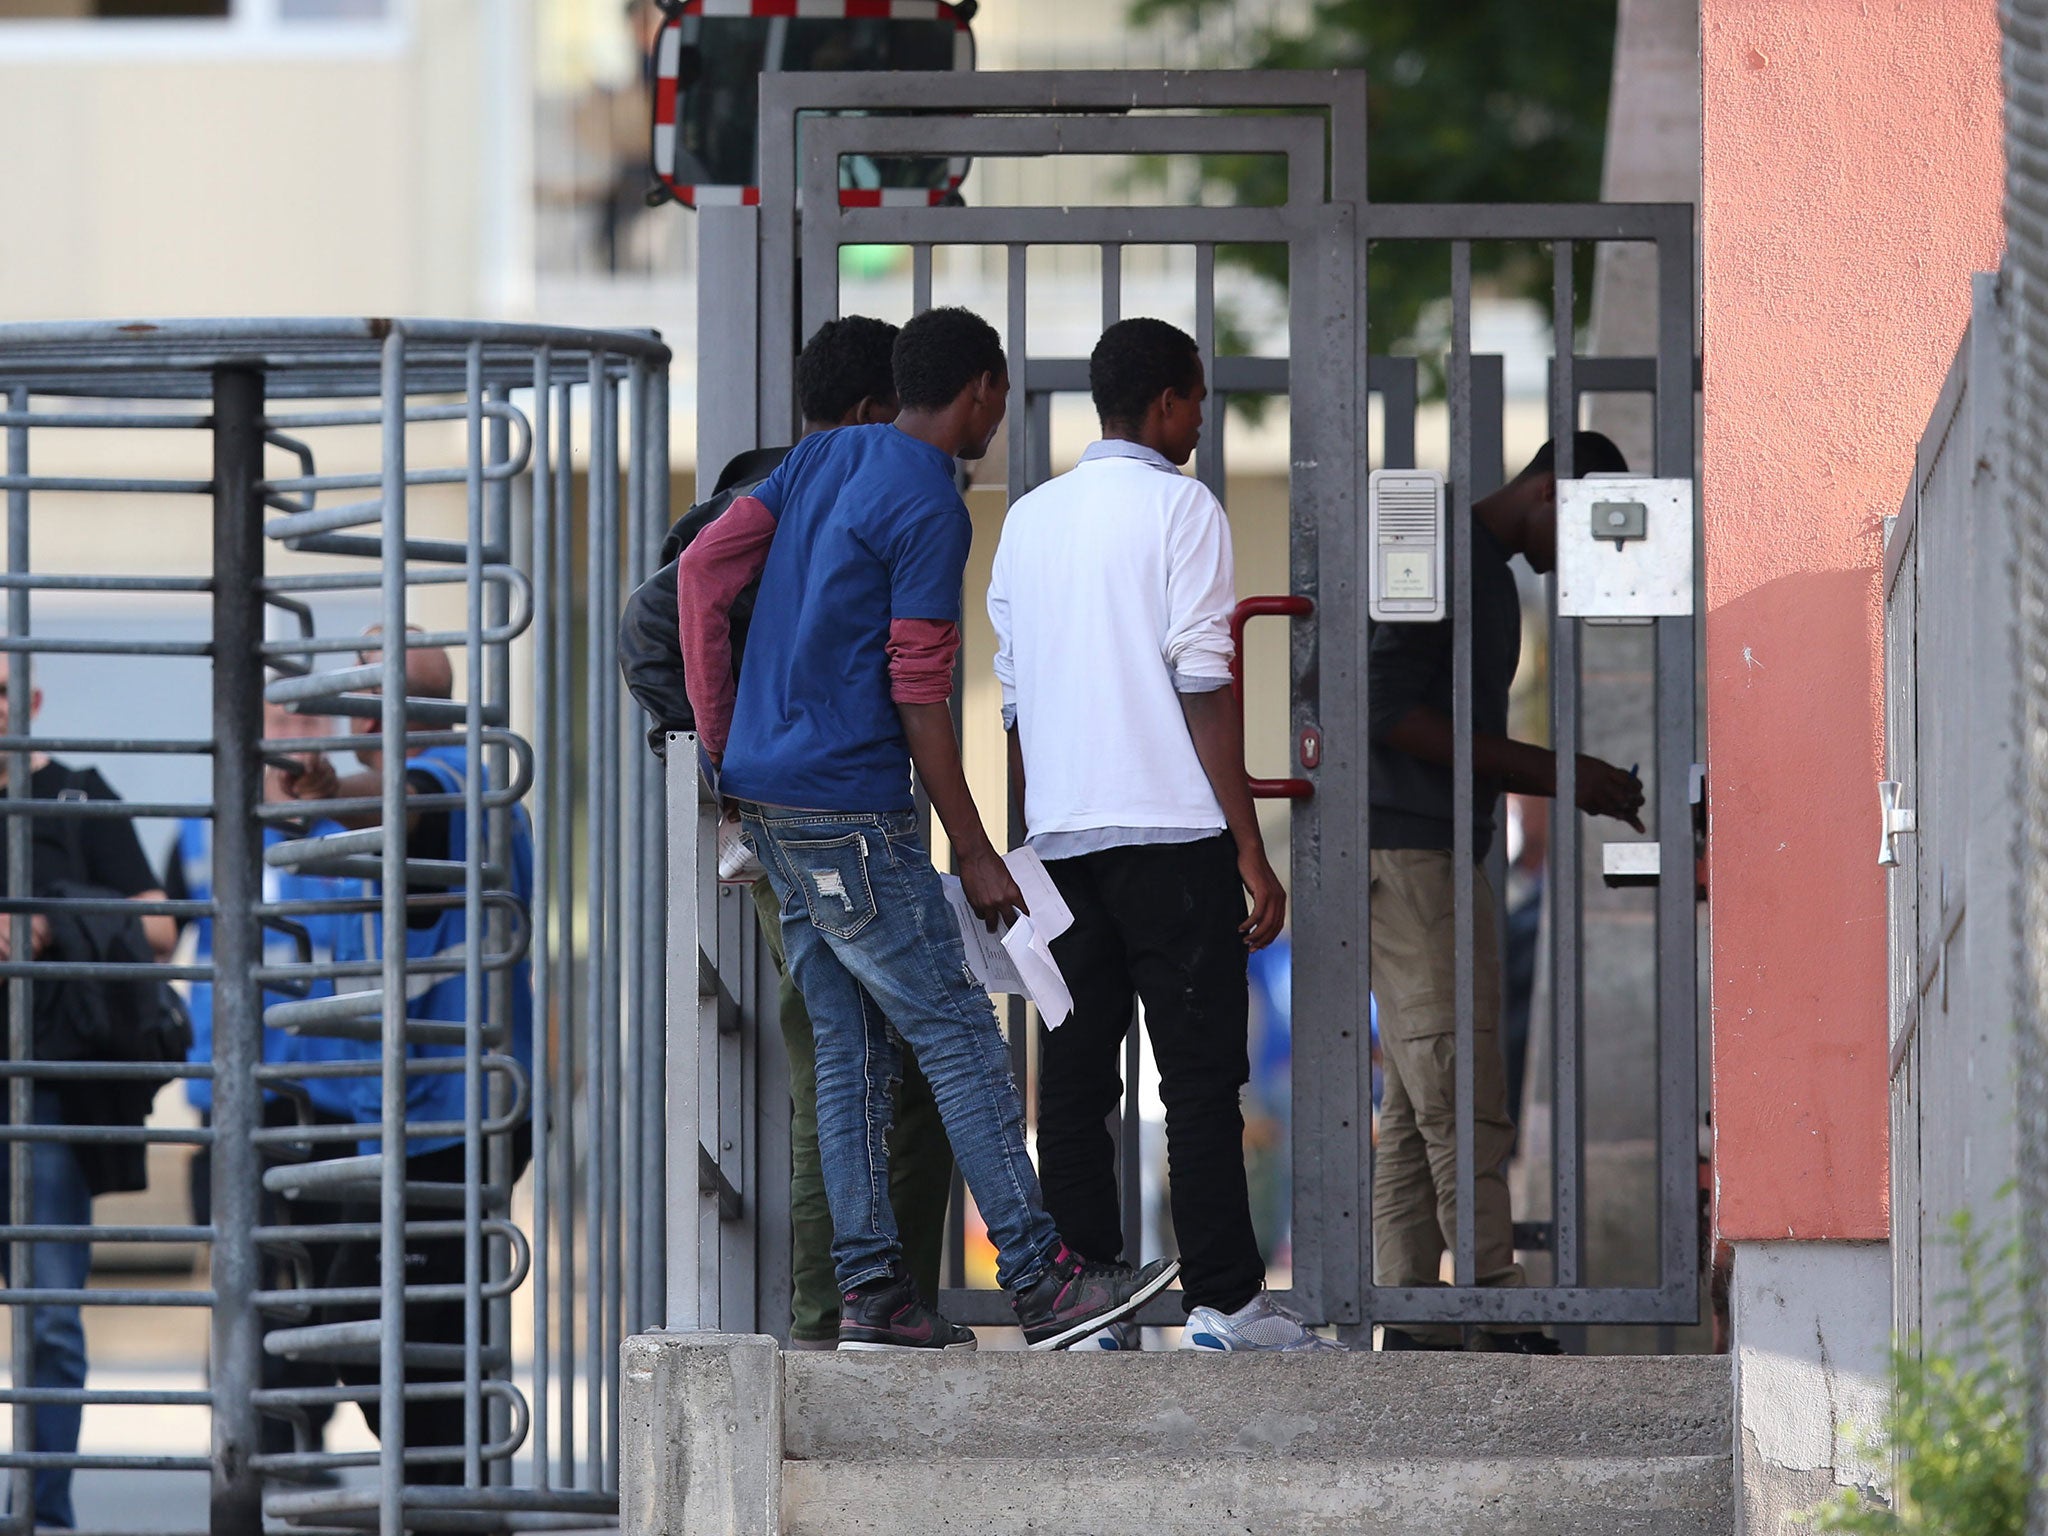 Refugees enter the reception centre for refugees in Zirndorf, after a suitcase exploded near the building on 27 July 2016.